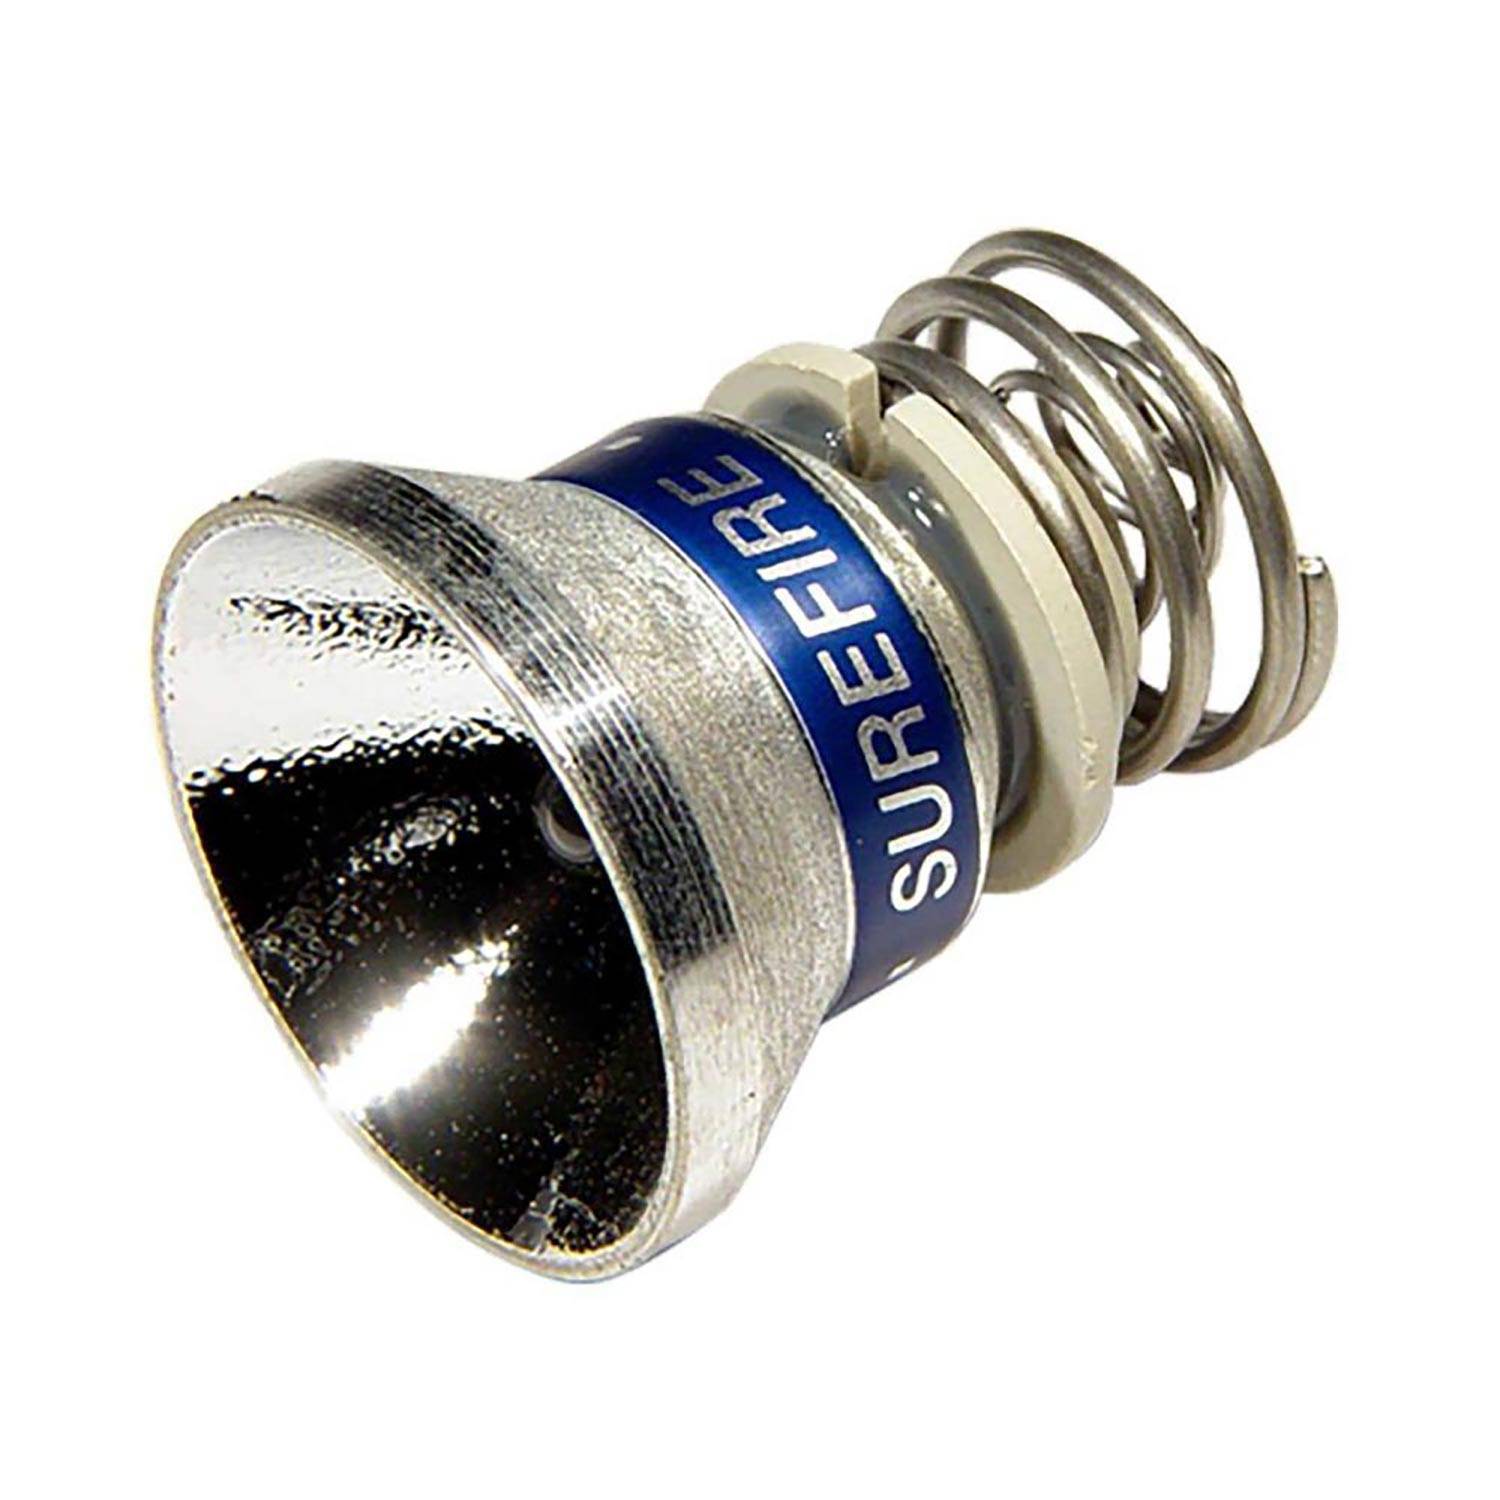 SureFire P60 Lamp Assembly for 6P and G2 and G2Z and Z2 Flas